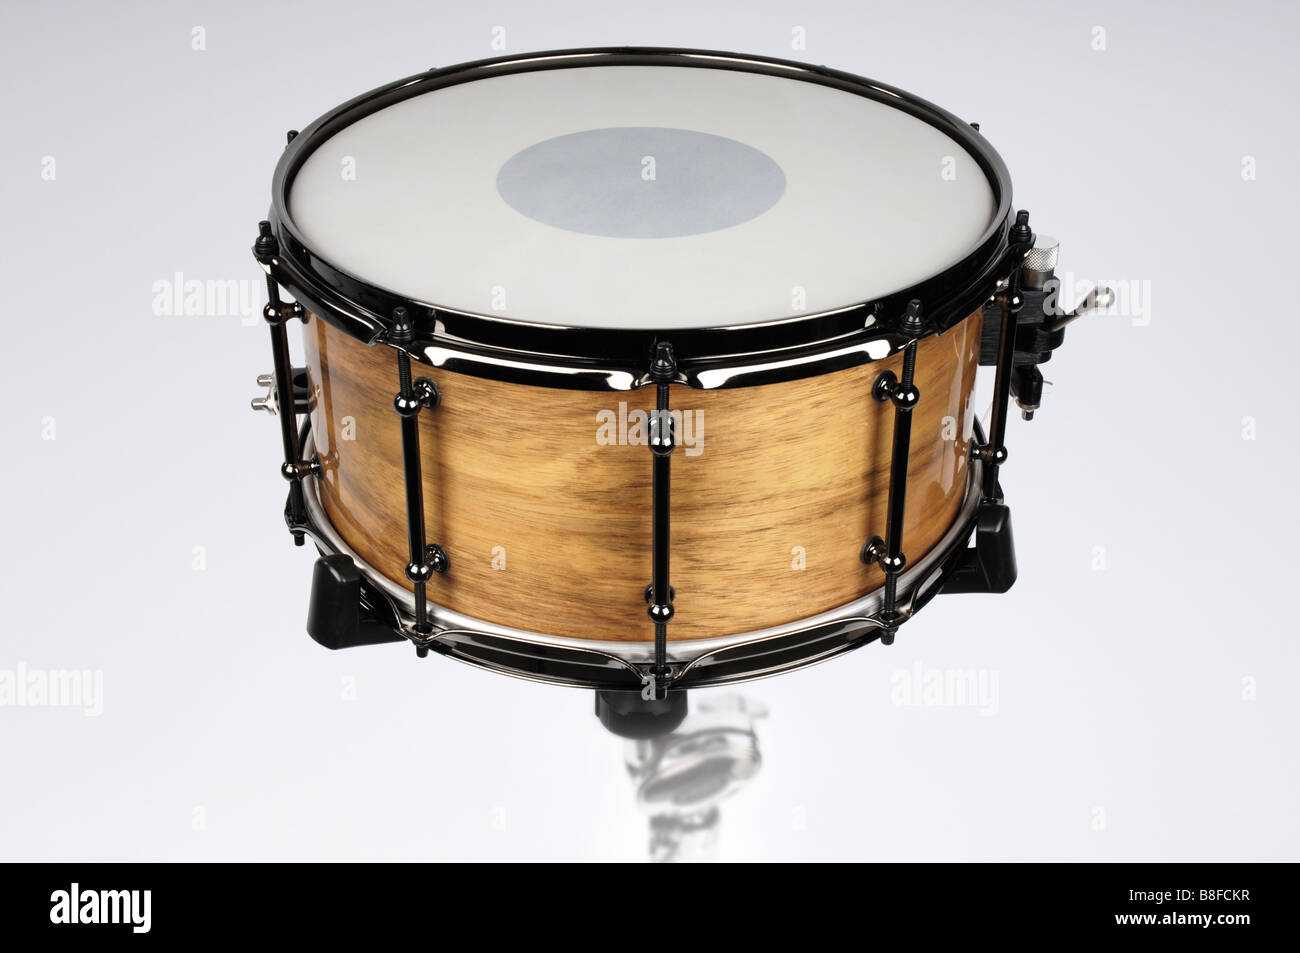 Snare Drum High Resolution Stock Photography and Images - Alamy